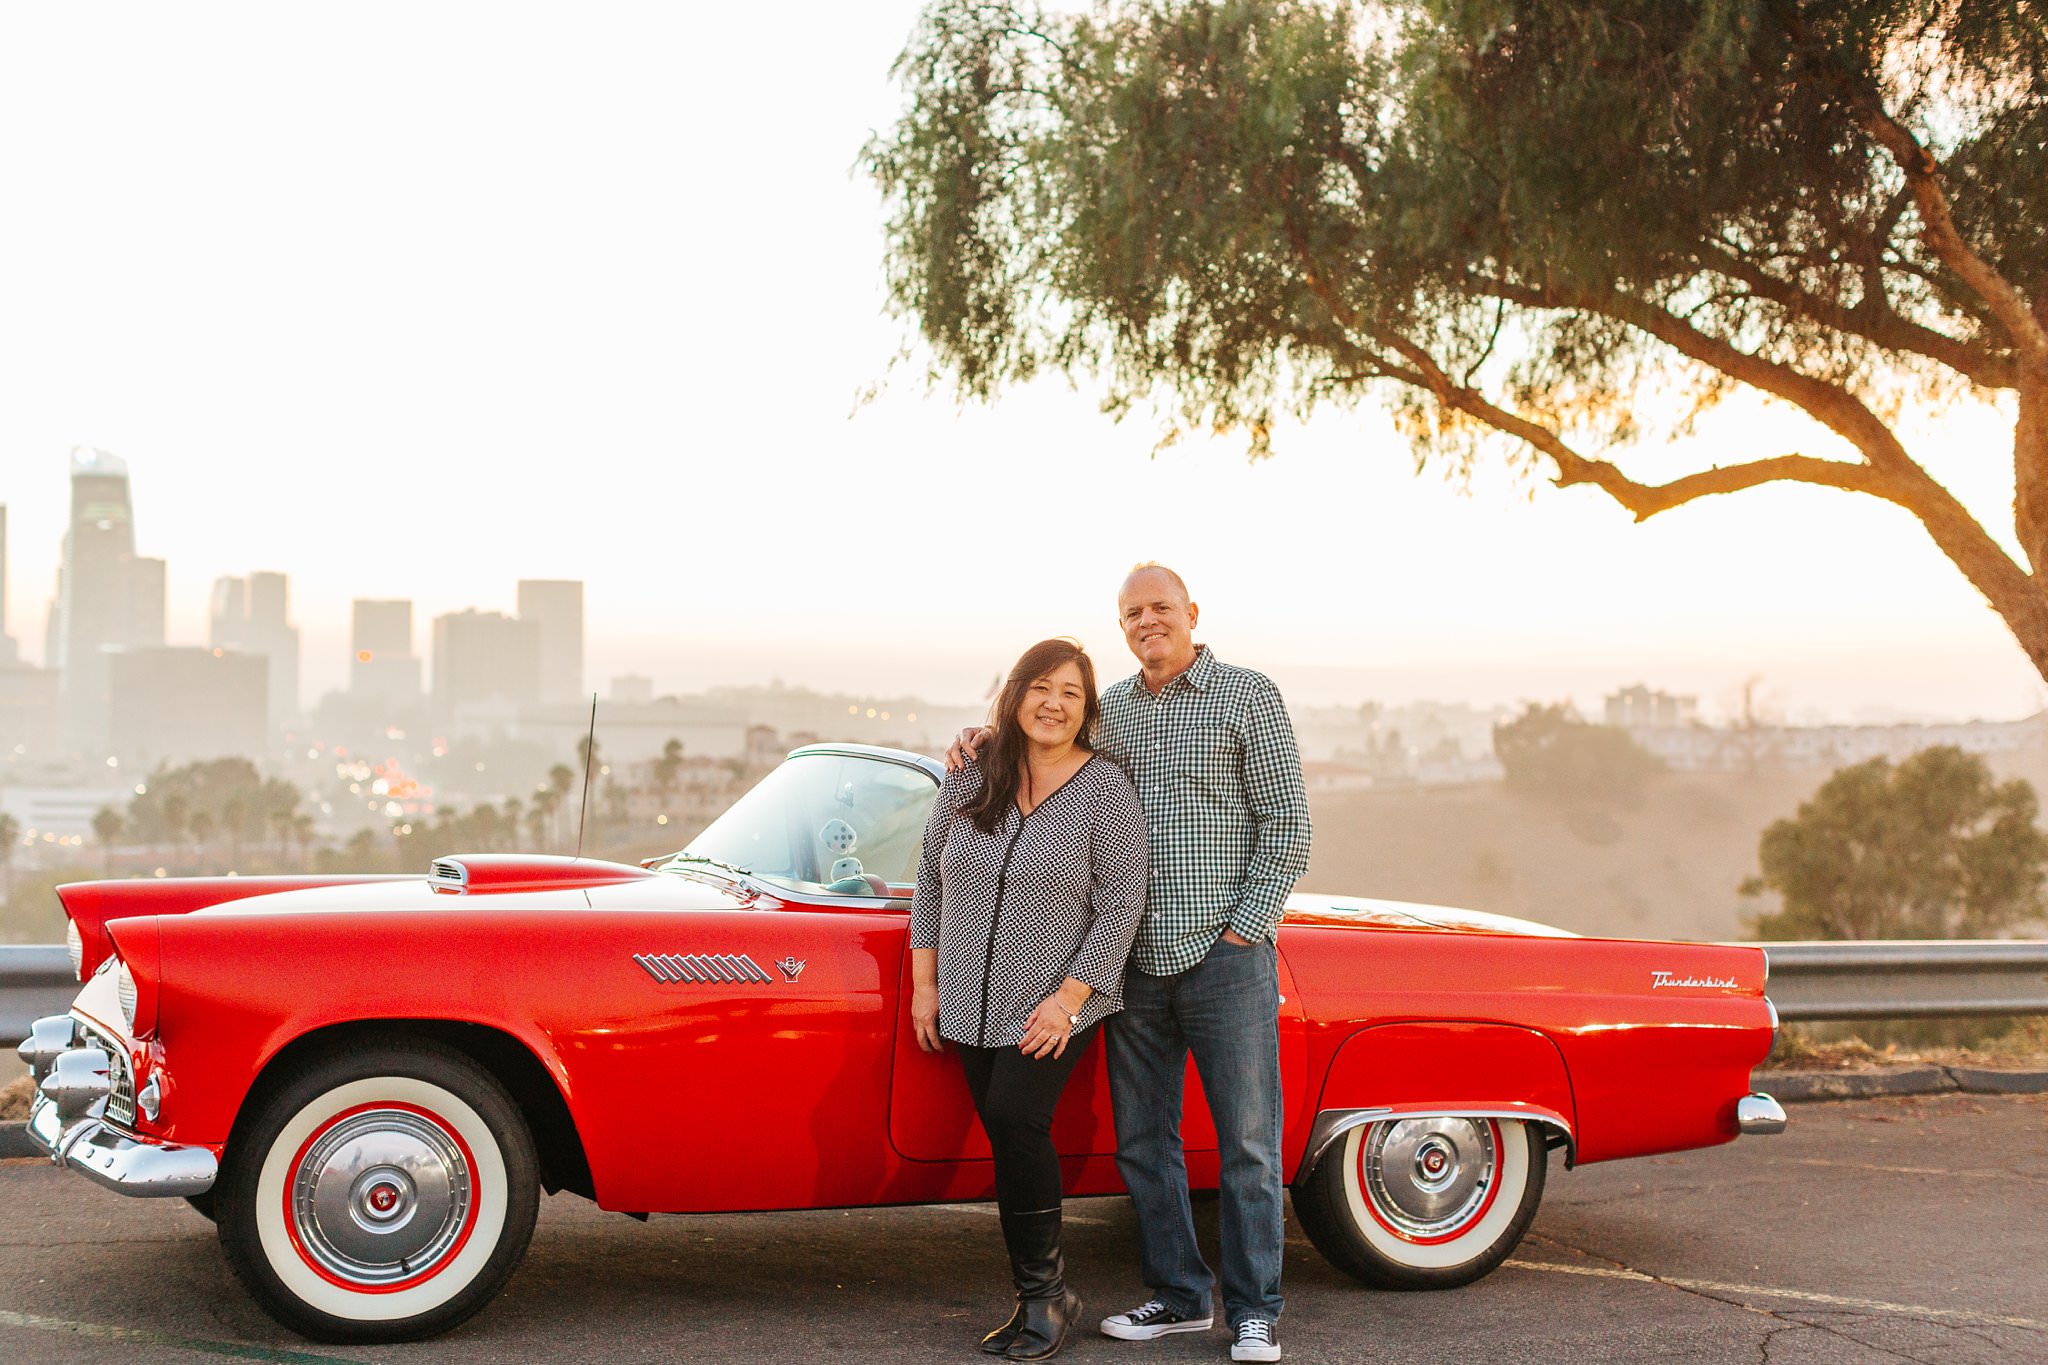 Classic car at Dodger Stadium - http://brittneyhannonphotography.com